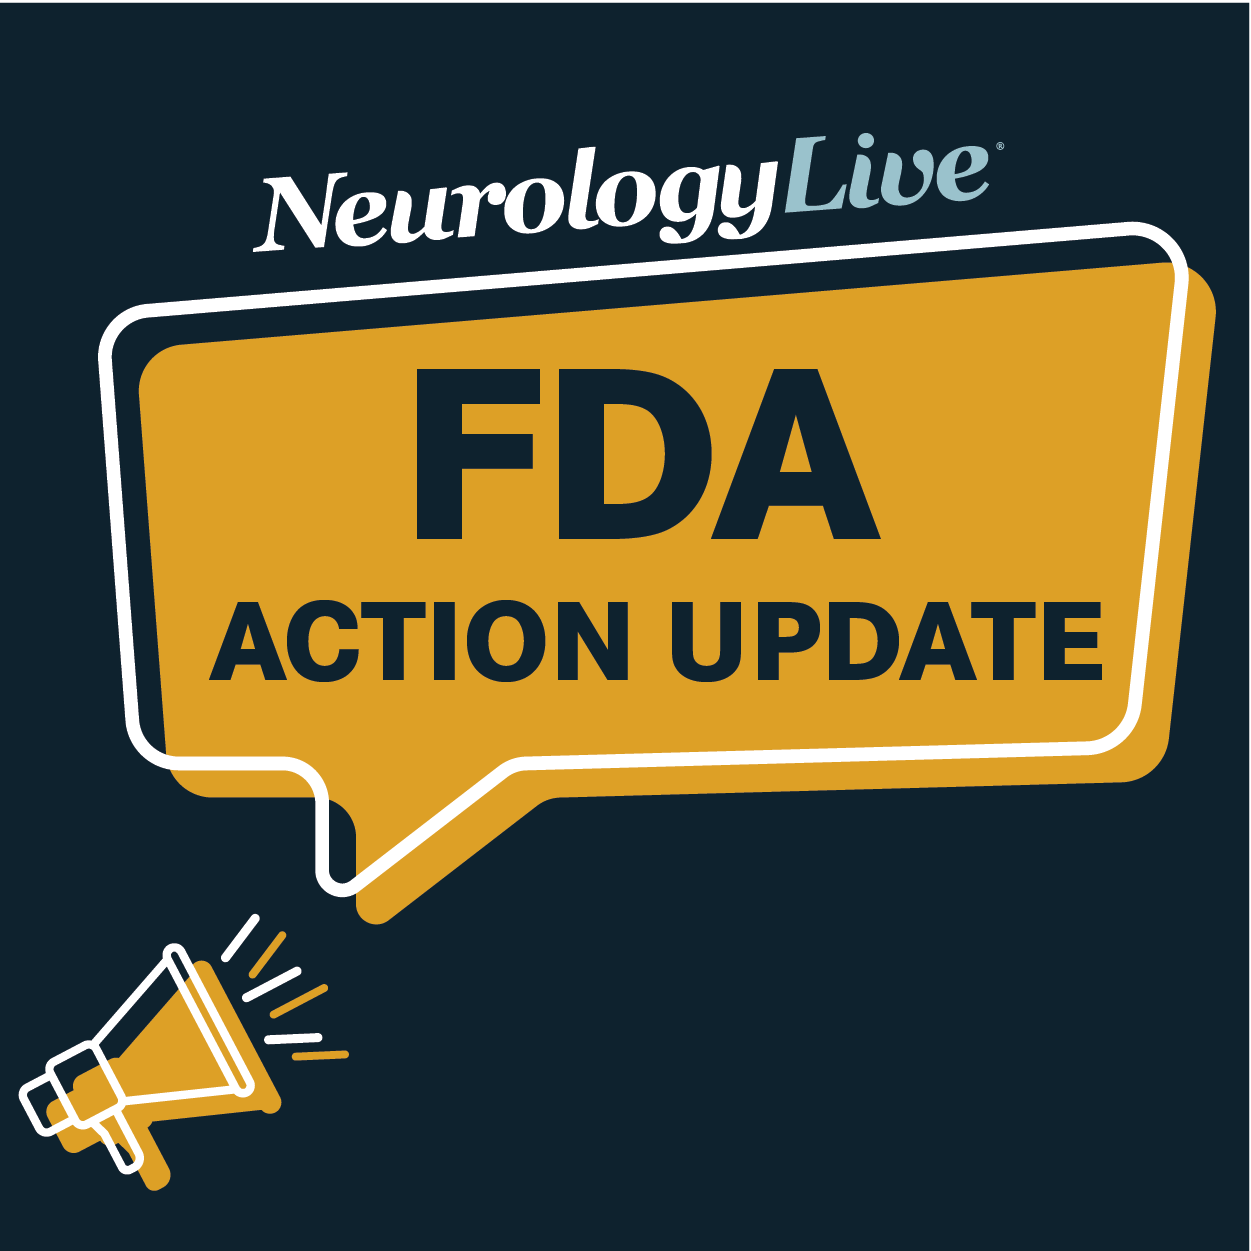 FDA Action Update, June 2022: Approvals, Extended Reviews, and Clinical Holds